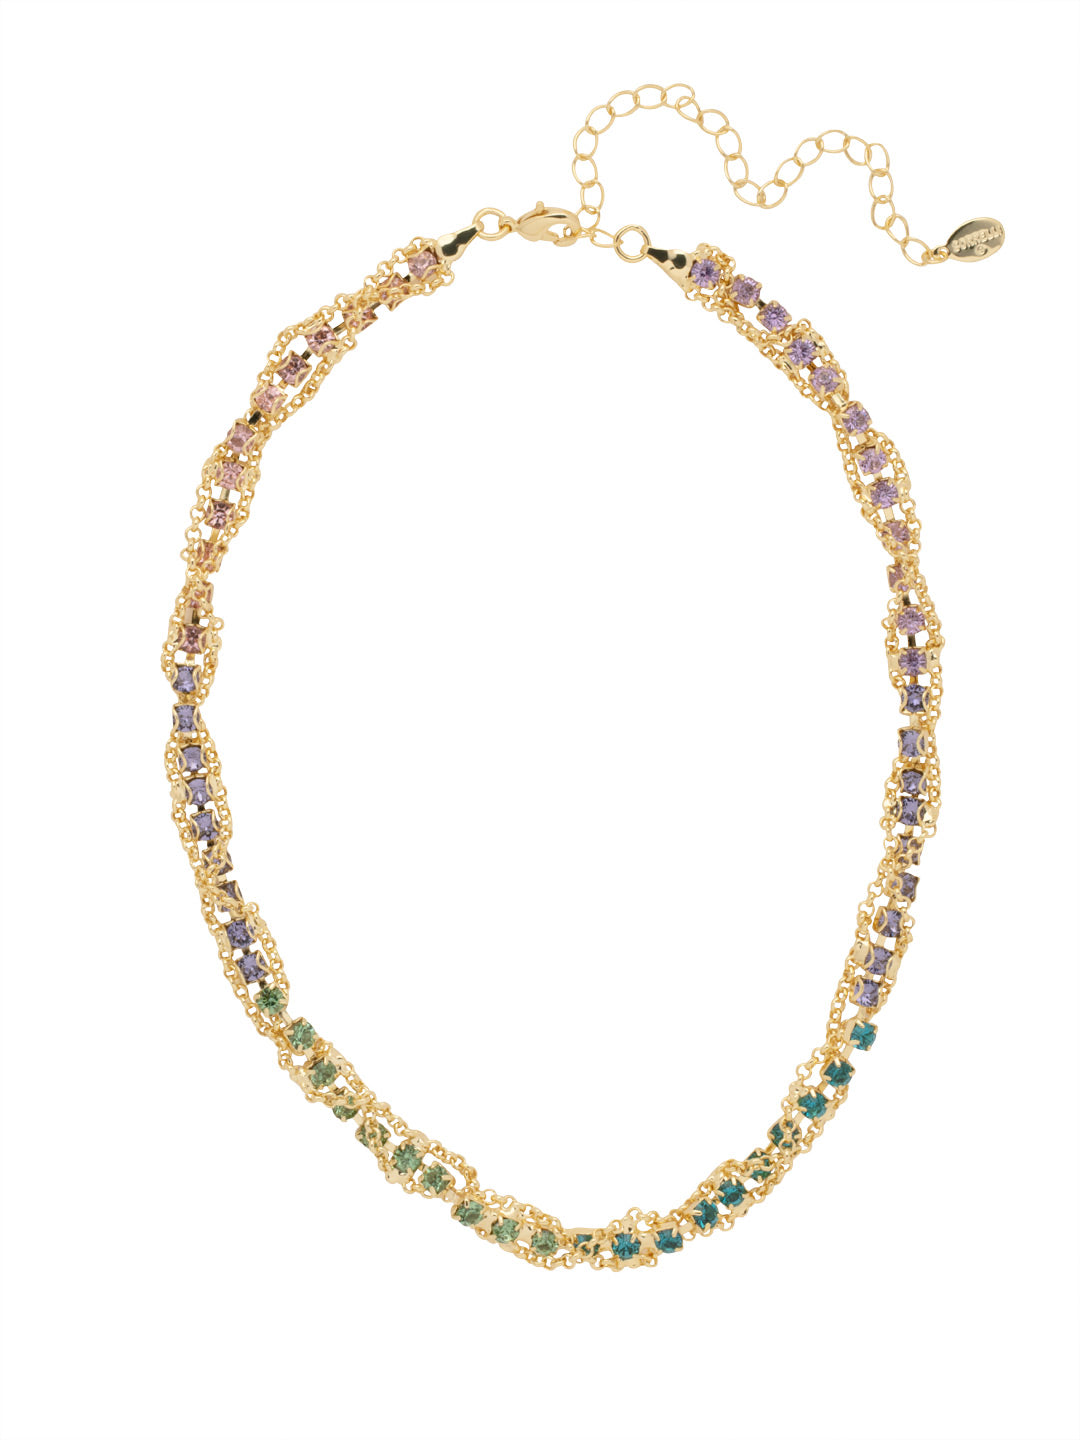 Brandi Classic Tennis Necklace - NFC60BGHBR - <p>The Brandi Classic Tennis Necklace features a timeless crystal lined necklace, elevated with a braided chain design. From Sorrelli's Happy Birthday Redux collection in our Bright Gold-tone finish.</p>